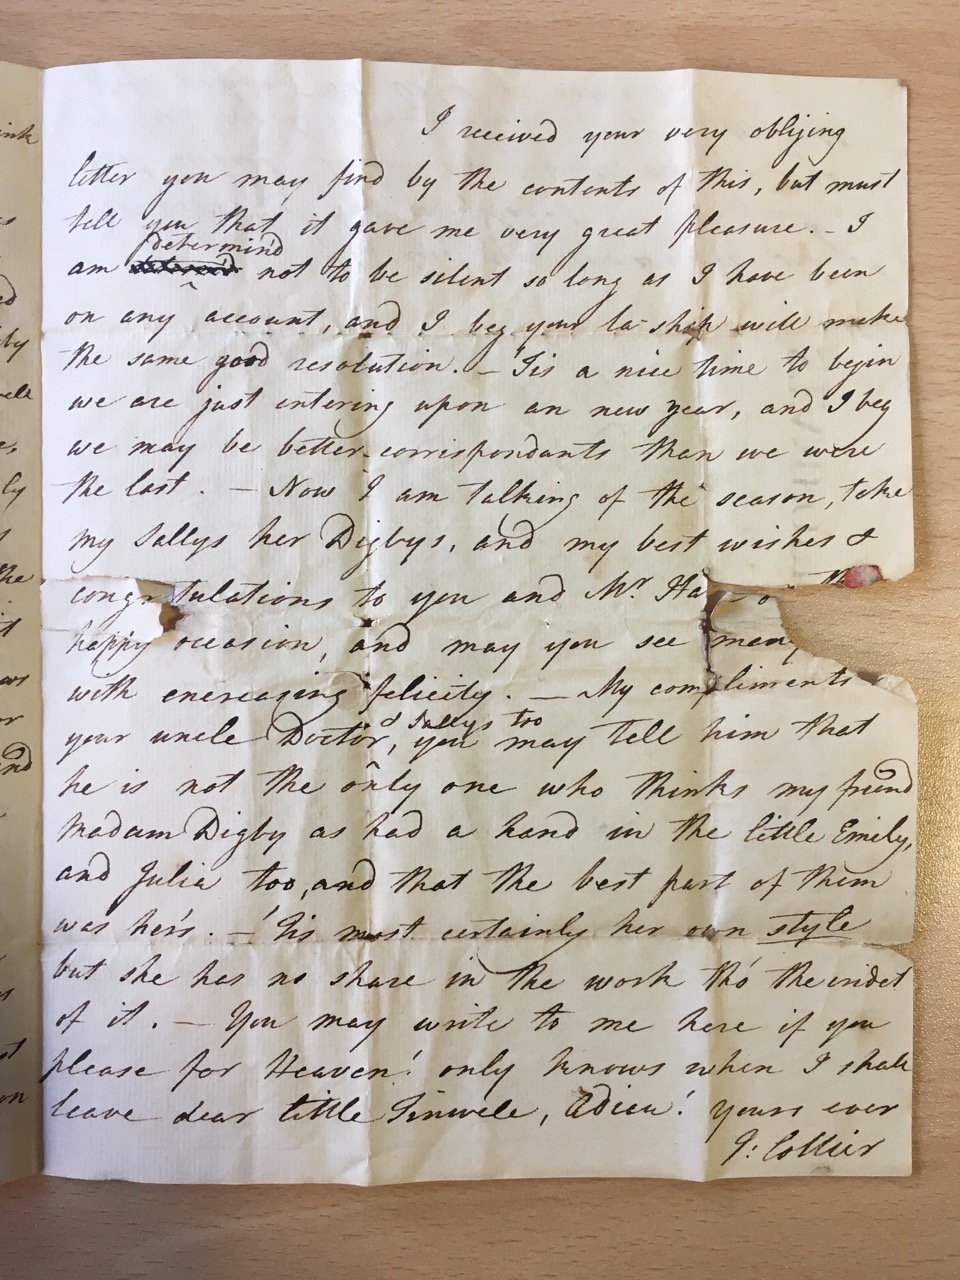 Image #3 of letter: I Collier to Ann Hare, 24 December [?1769]